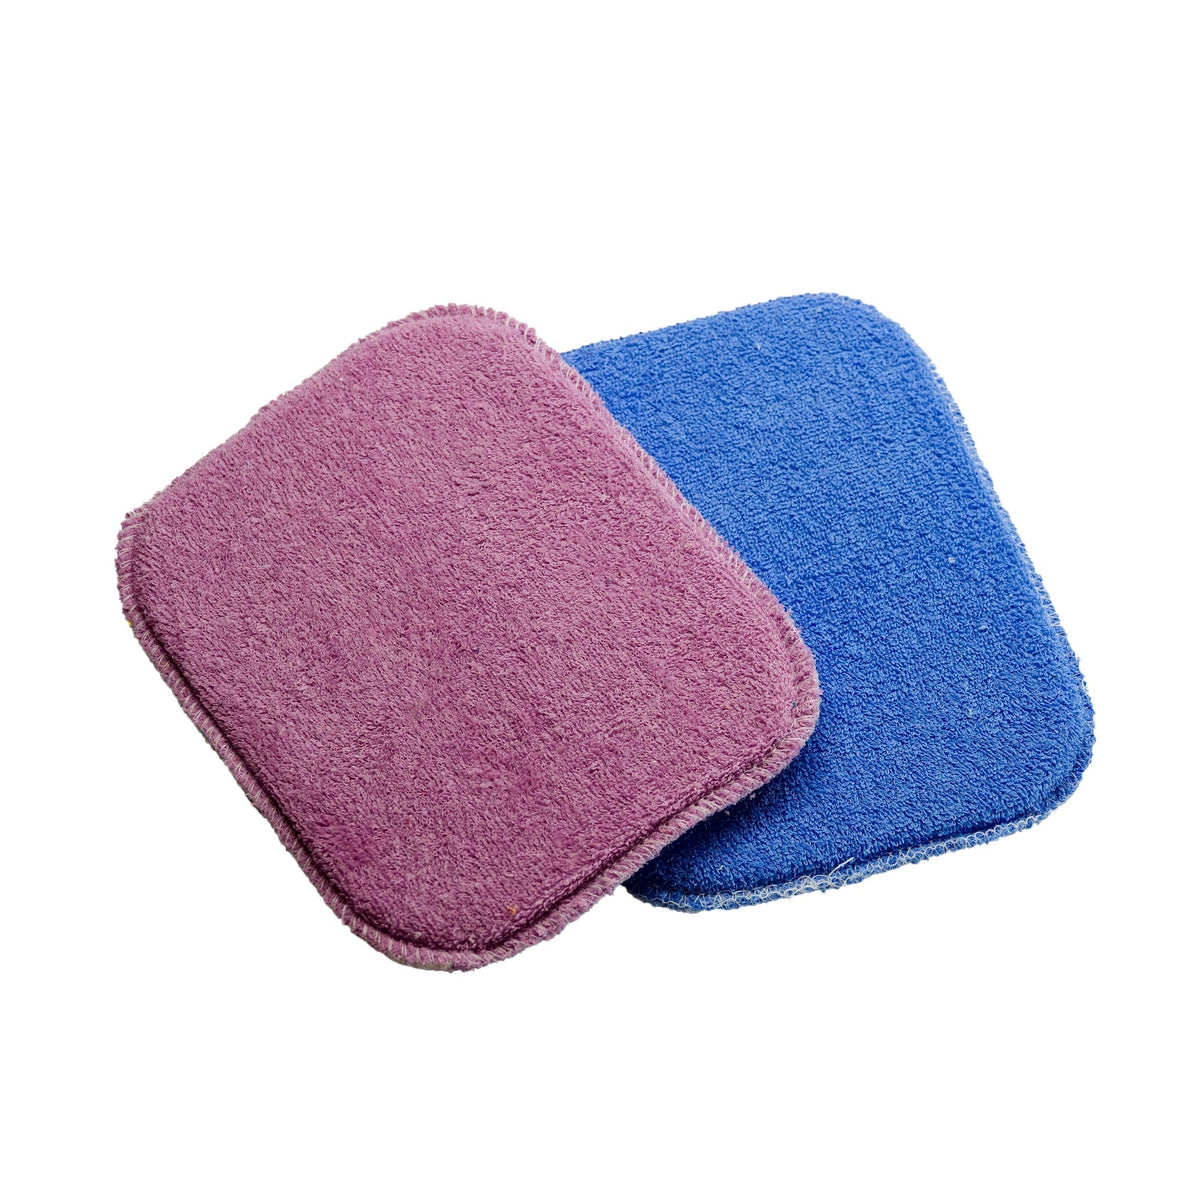 Ecological scourer Sustainable cleaning sponge – Amelia My Healthy Way